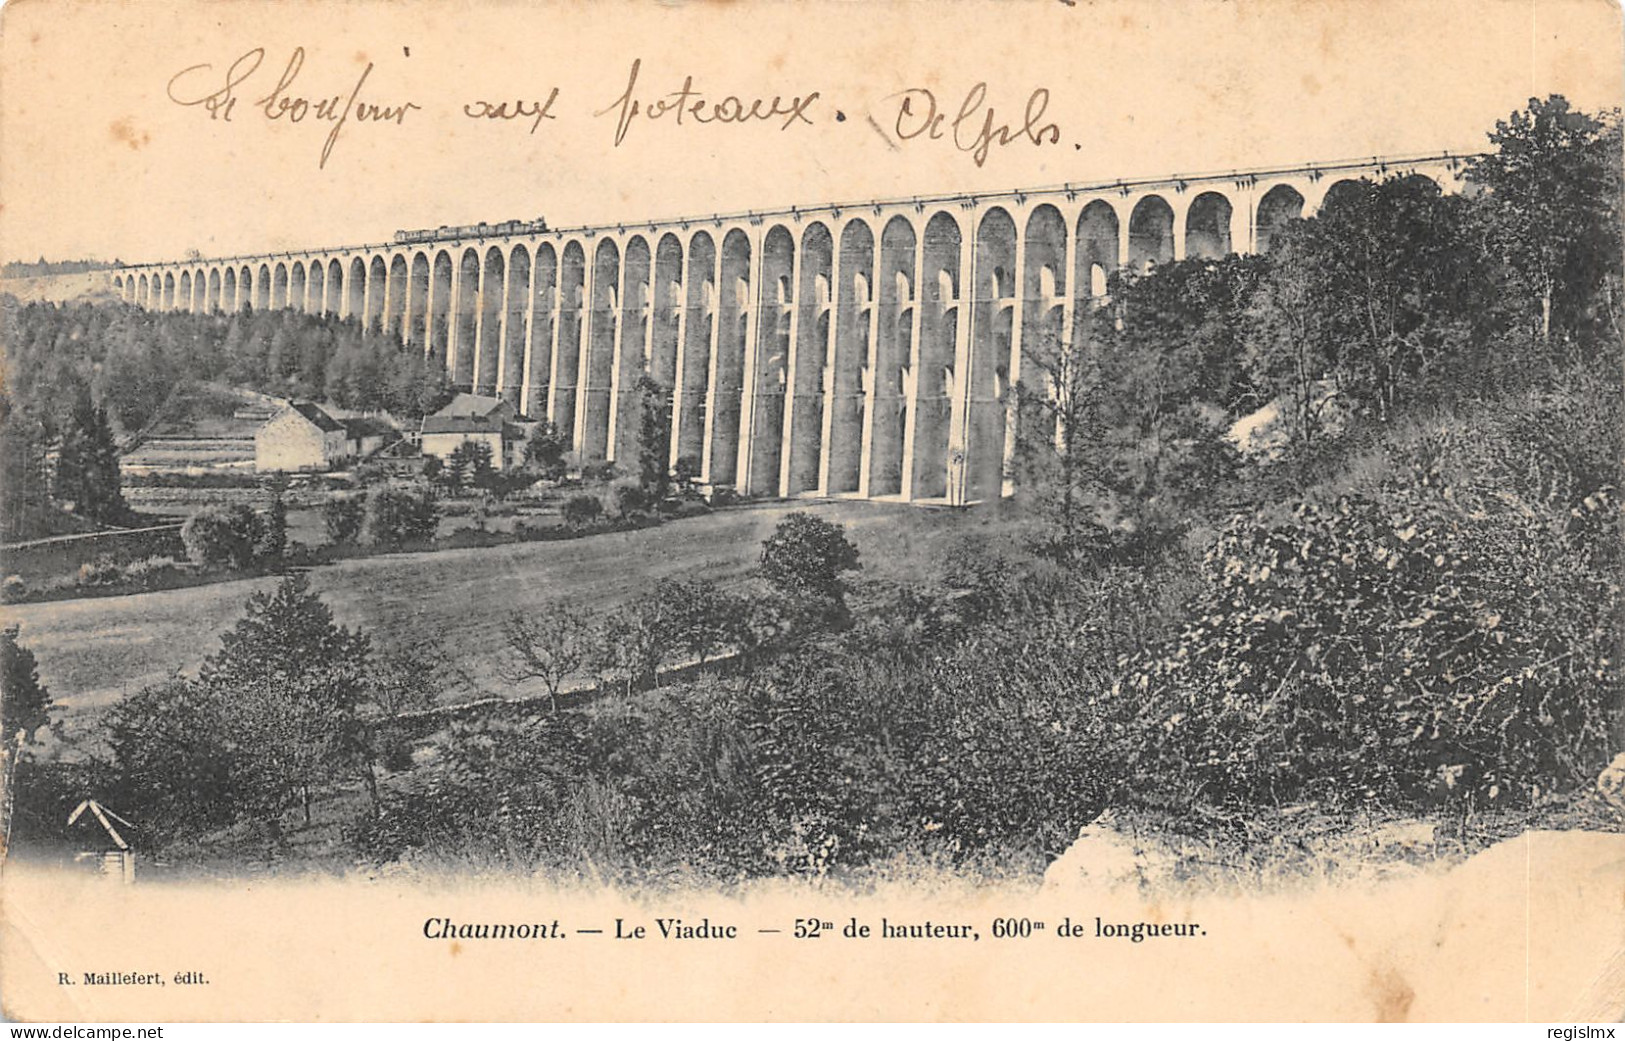 52-CHAUMONT-N°T2405-A/0155 - Chaumont